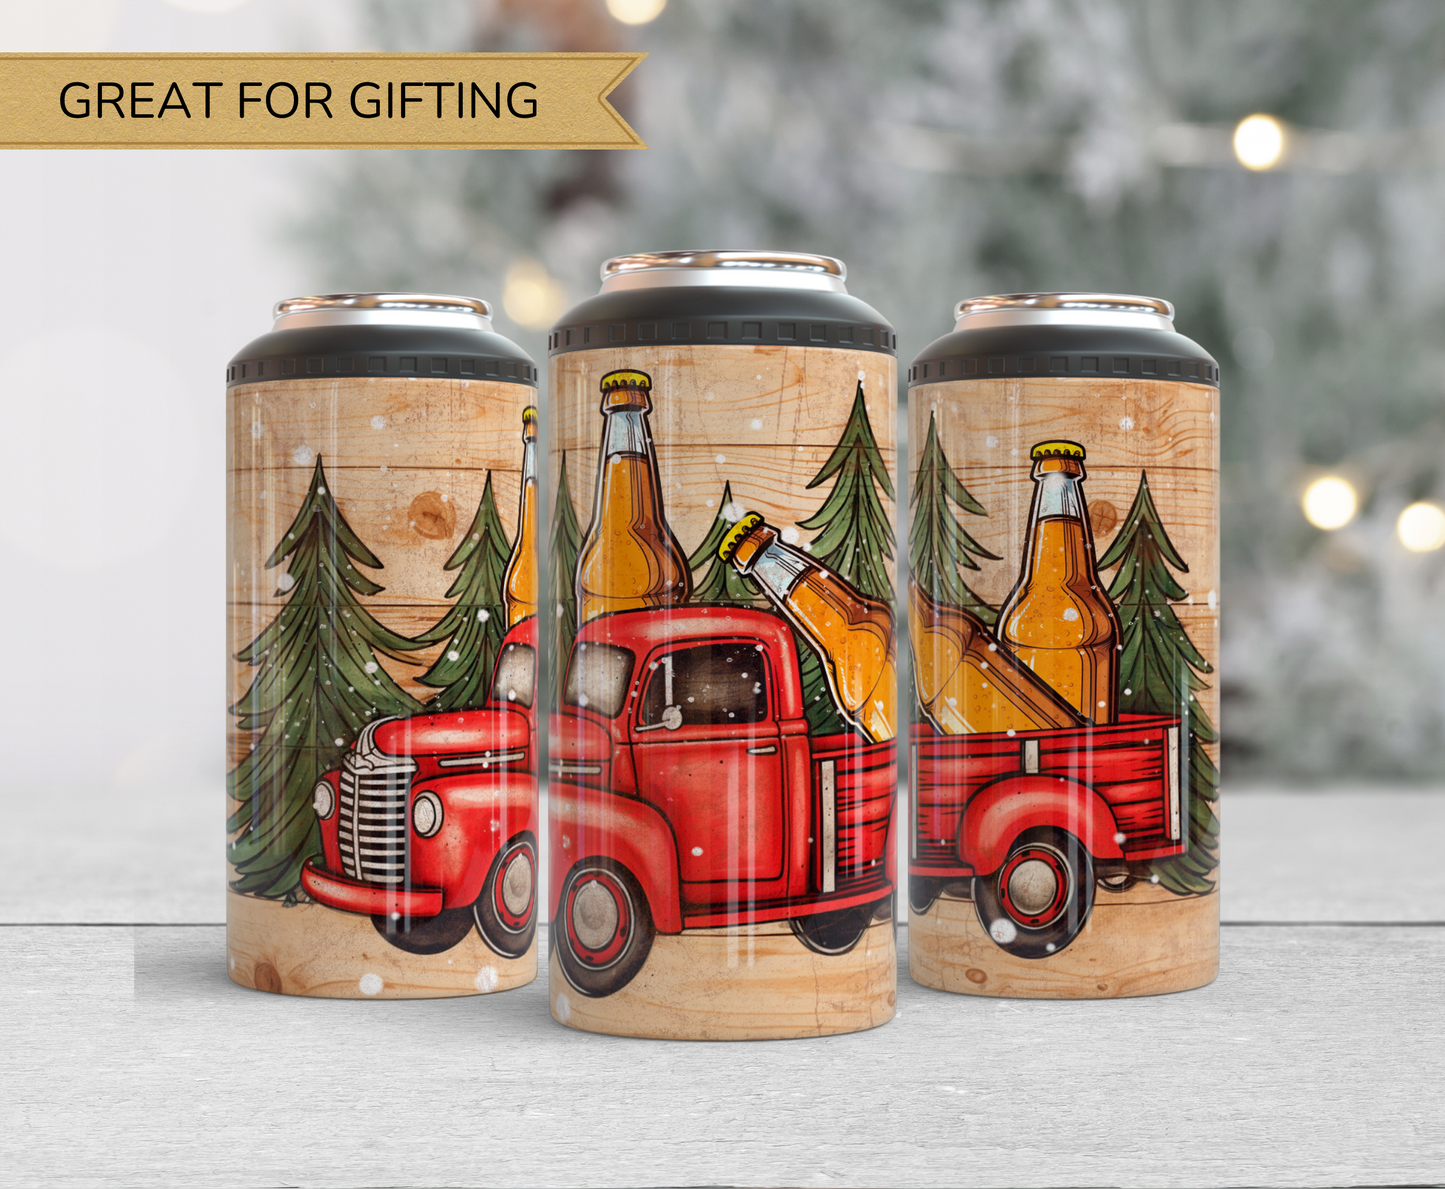 Can Cooler 4 in 1 | Beer Red Truck